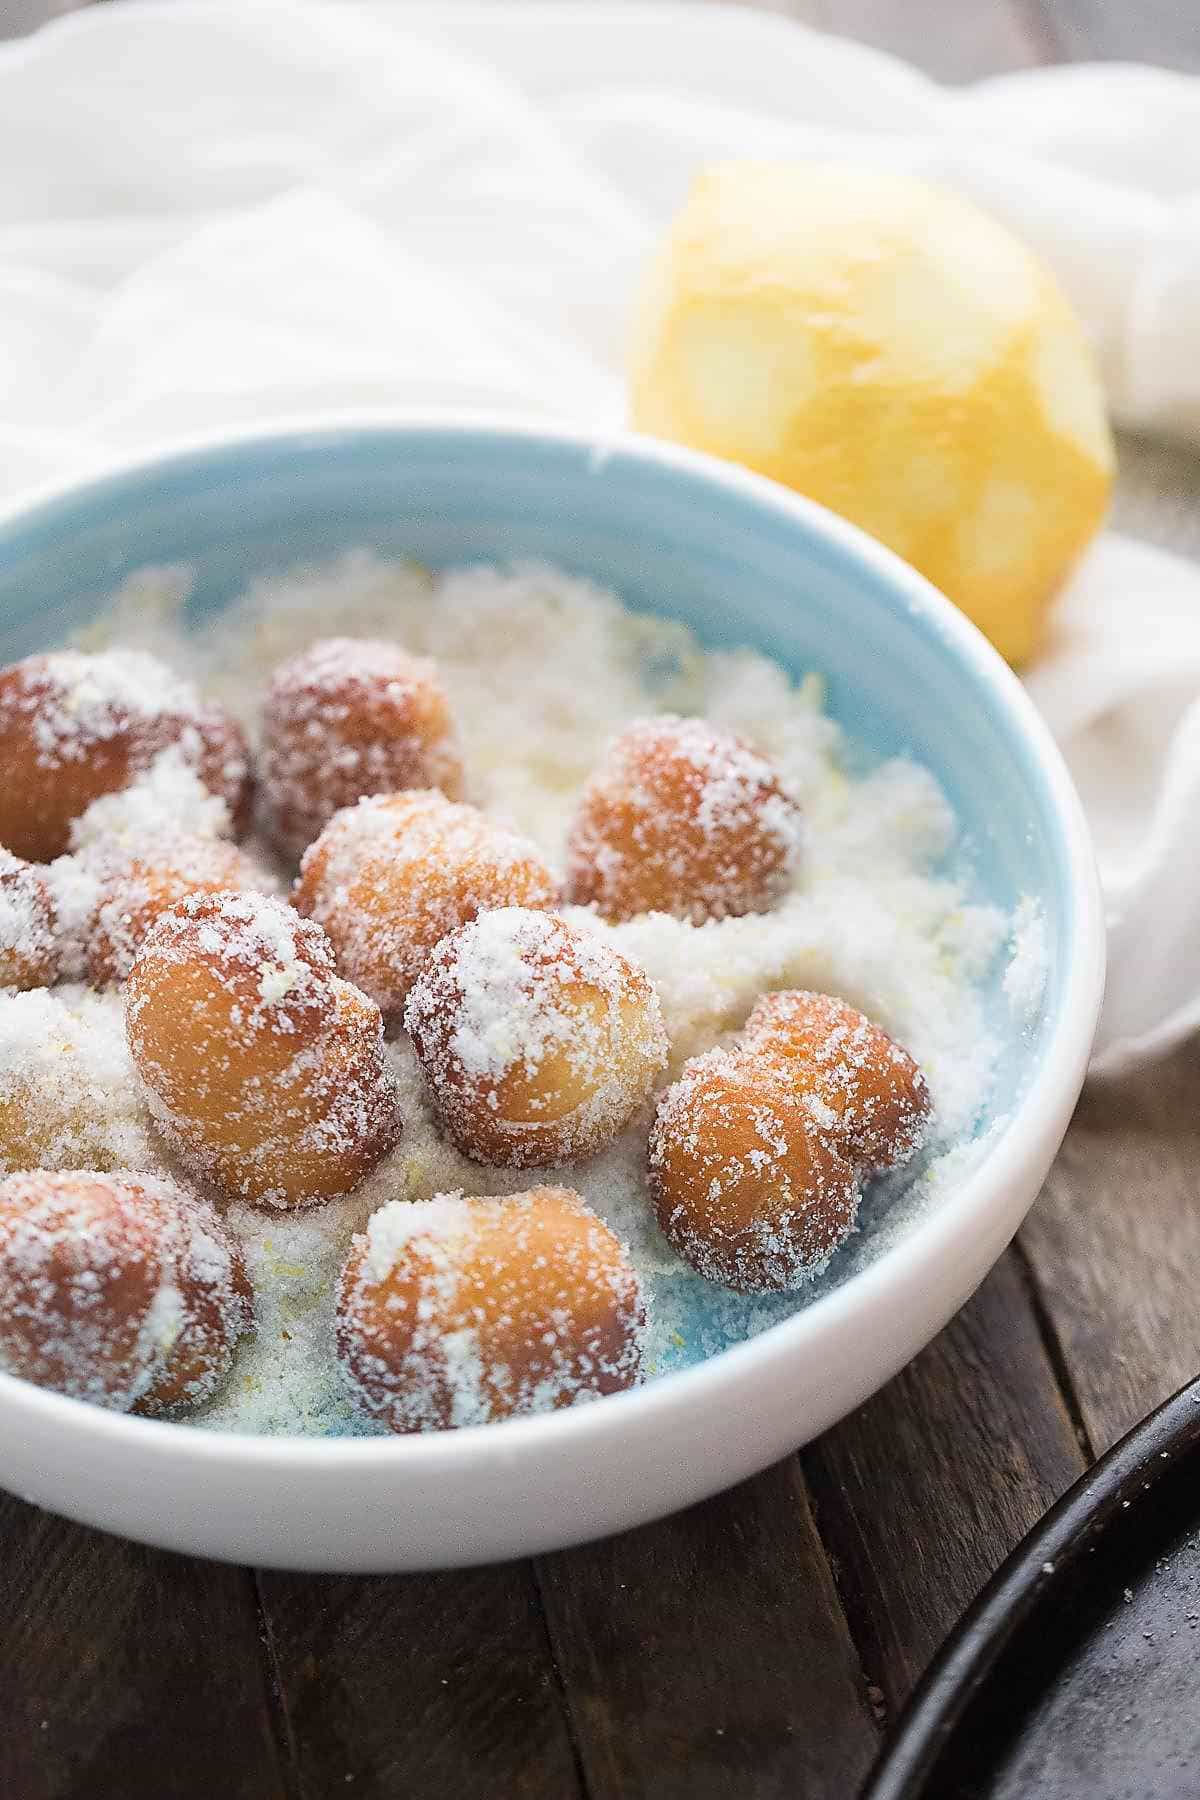 Sweet little fried biscuit donuts coated in a lemon sugar mixture!